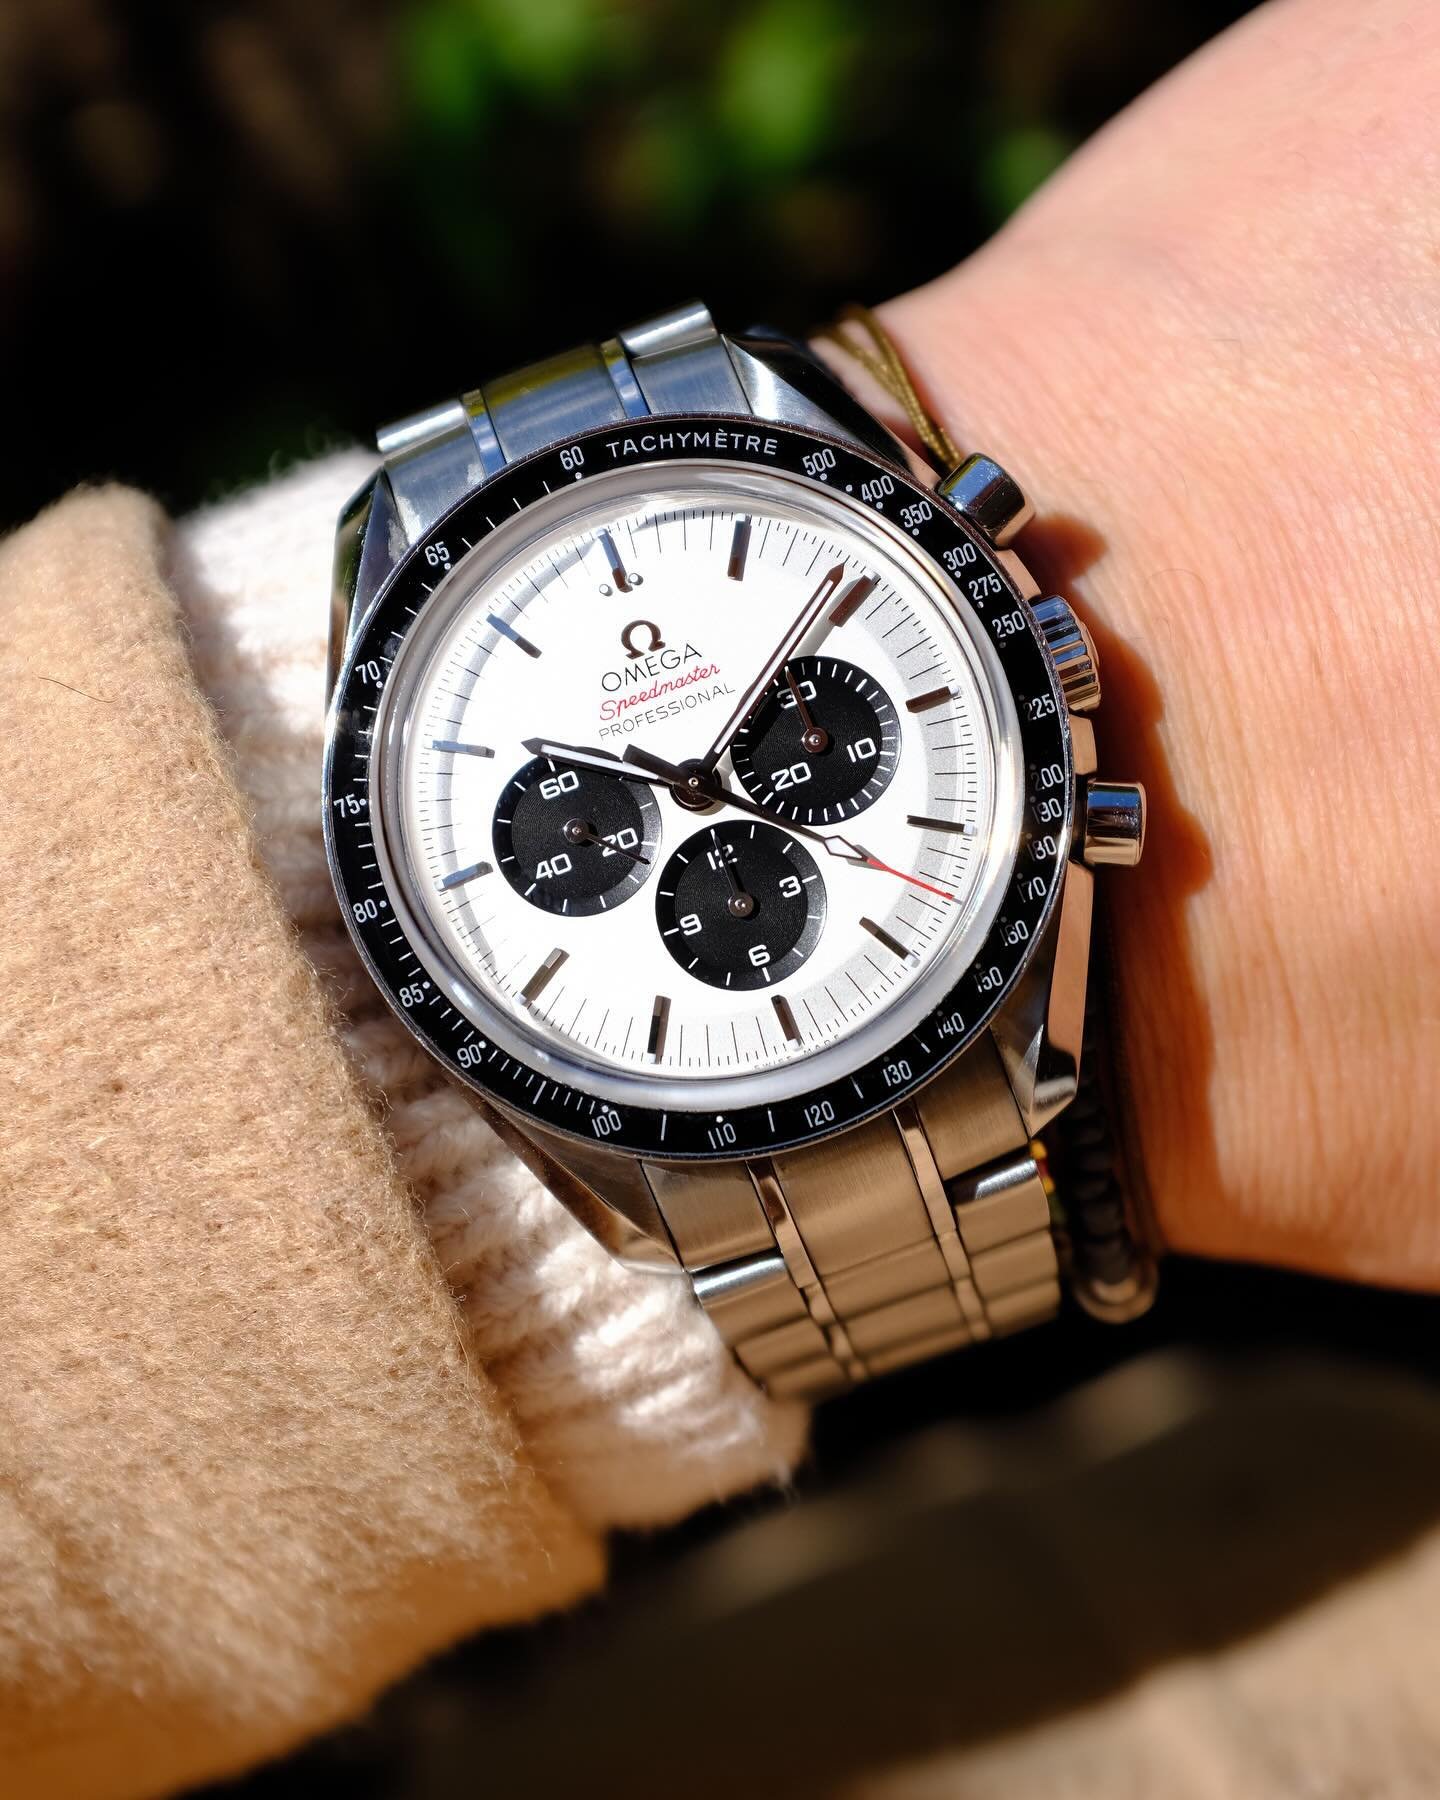 Inarguably one of the best limited edition Speedmasters ever made was to commemorate an event that was postponed a year because of you know what. Coincidentally this watch was purchased on July 29th, 2021 while the Tokyo Olympic events were finally h